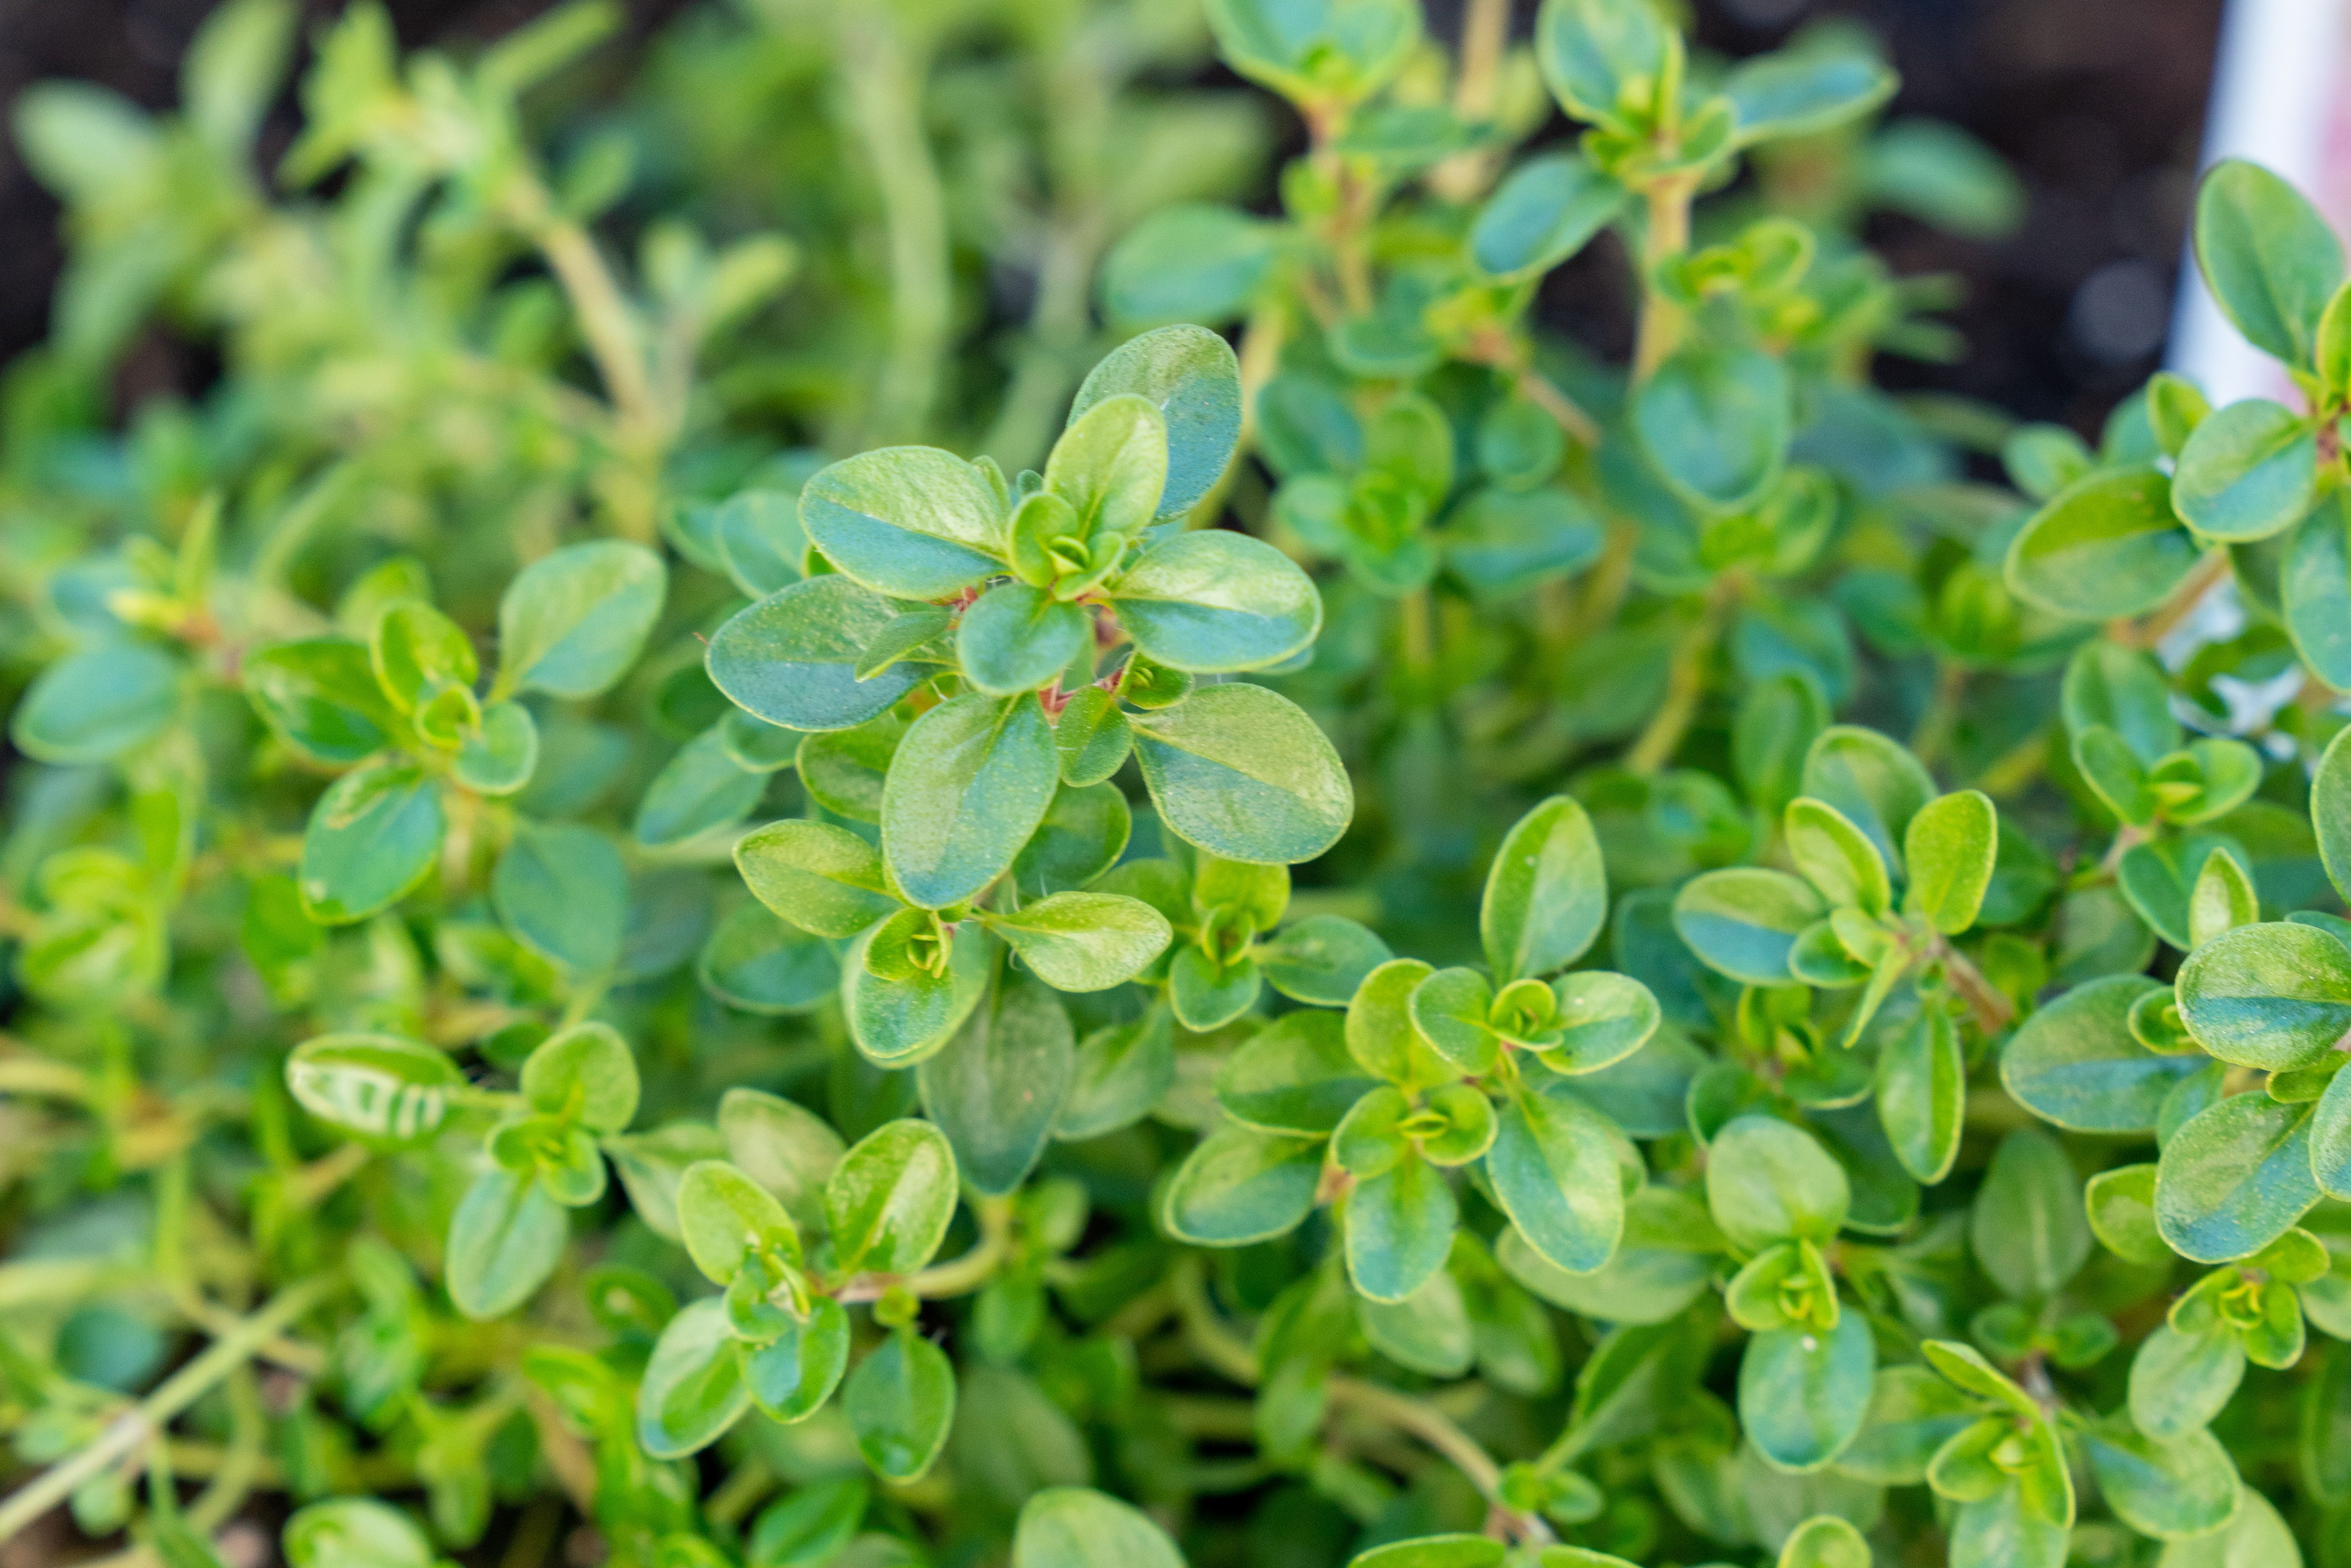 This Aromatic, Low-Growing Perennial Practically Takes Care of Itself